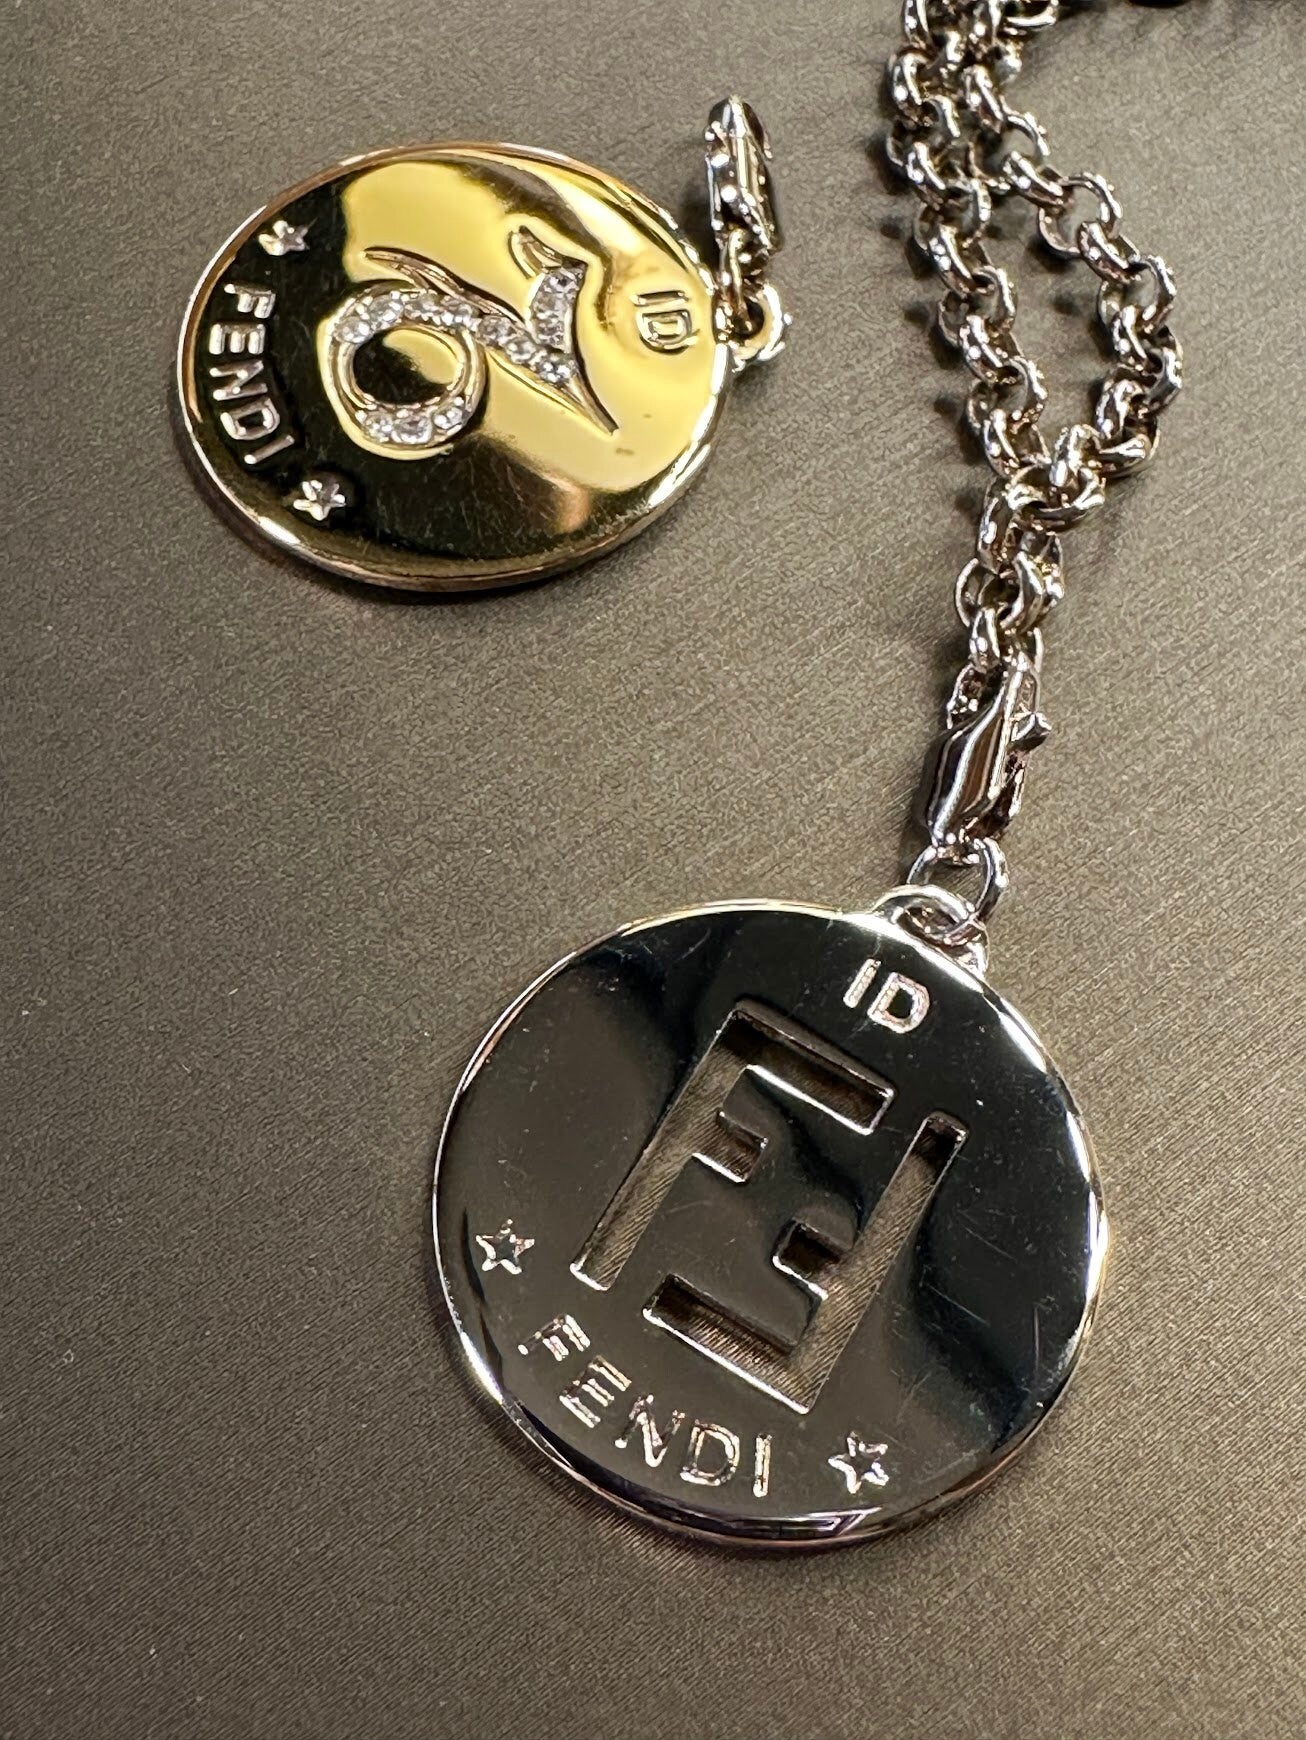 FENDI Vintage 100% Authentic Genuine, ID Identification Tag Necklace with Alphabet "K" and "Capricorn", 1990's